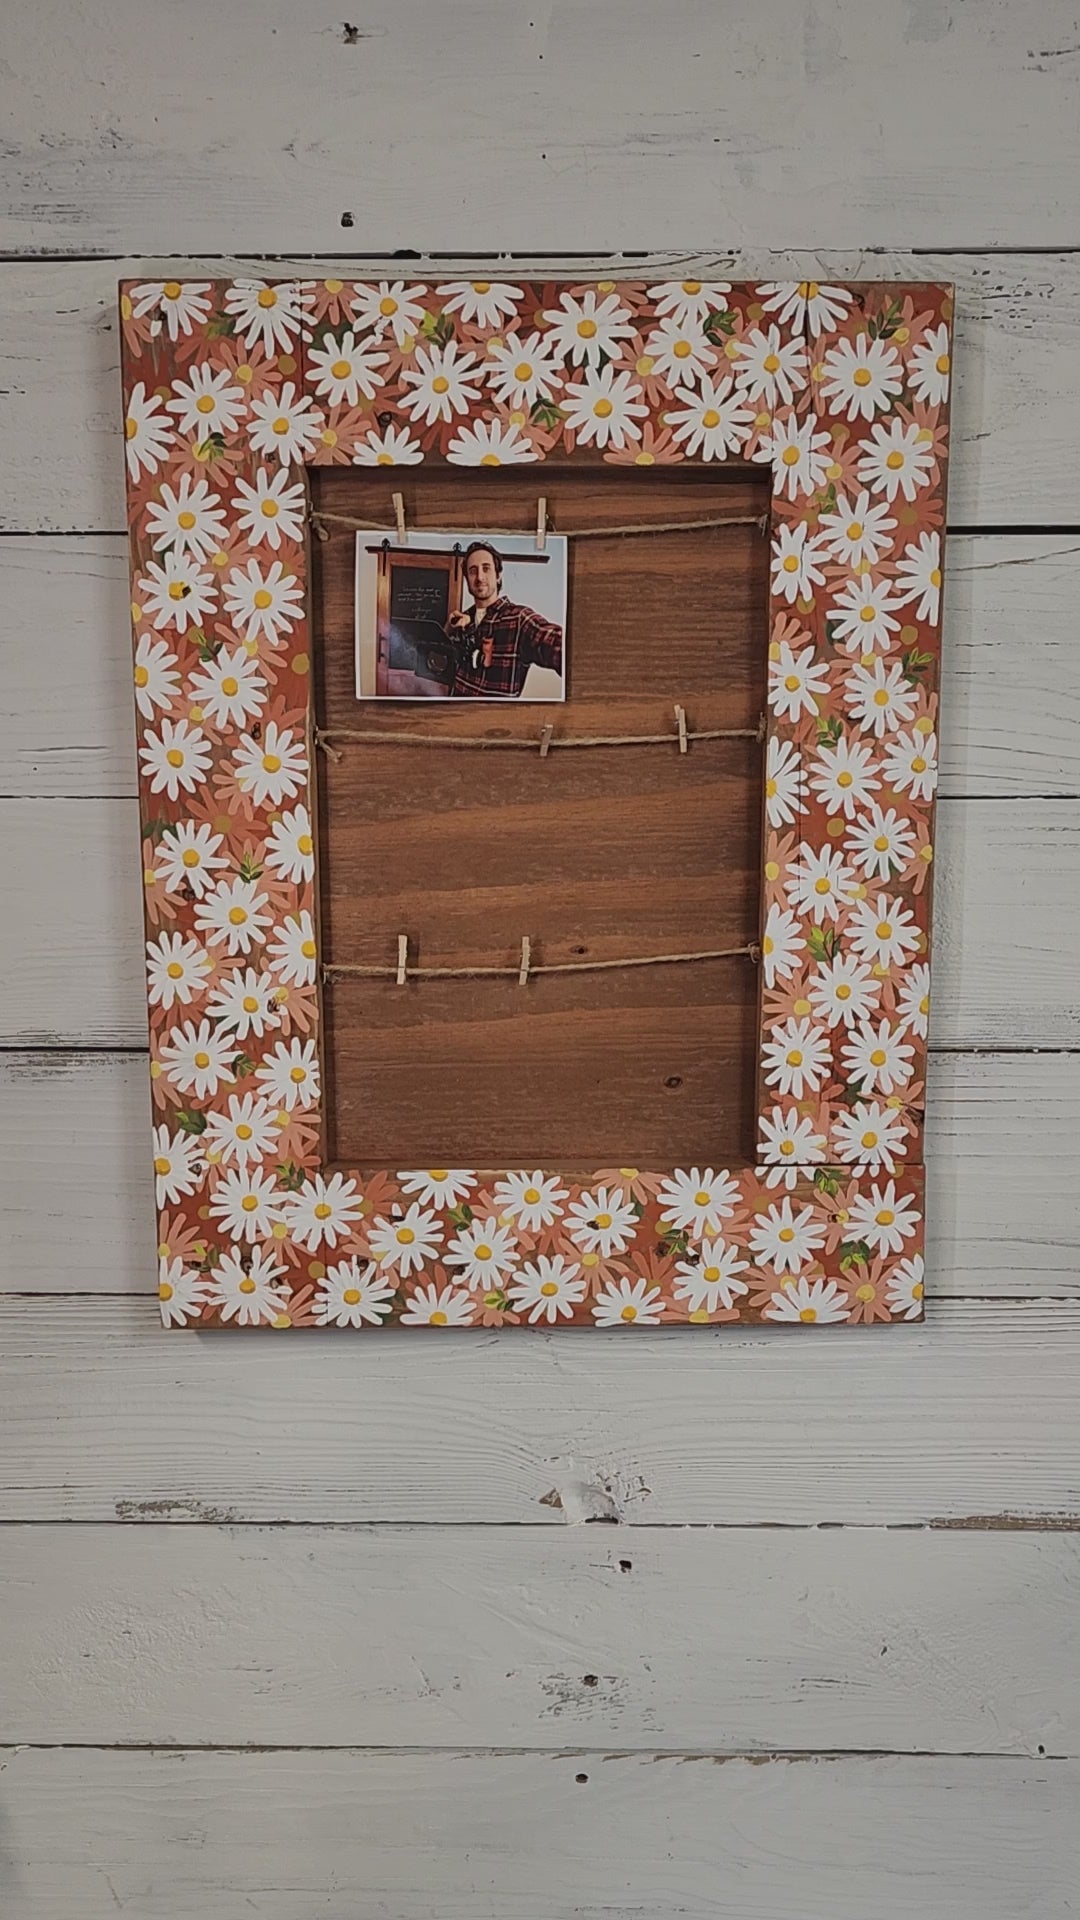 Peach Daisy Handpainted Acrylic floral frame, orange summer decor, pallet wood, photo display, picture clips, cottage deck porch artwork